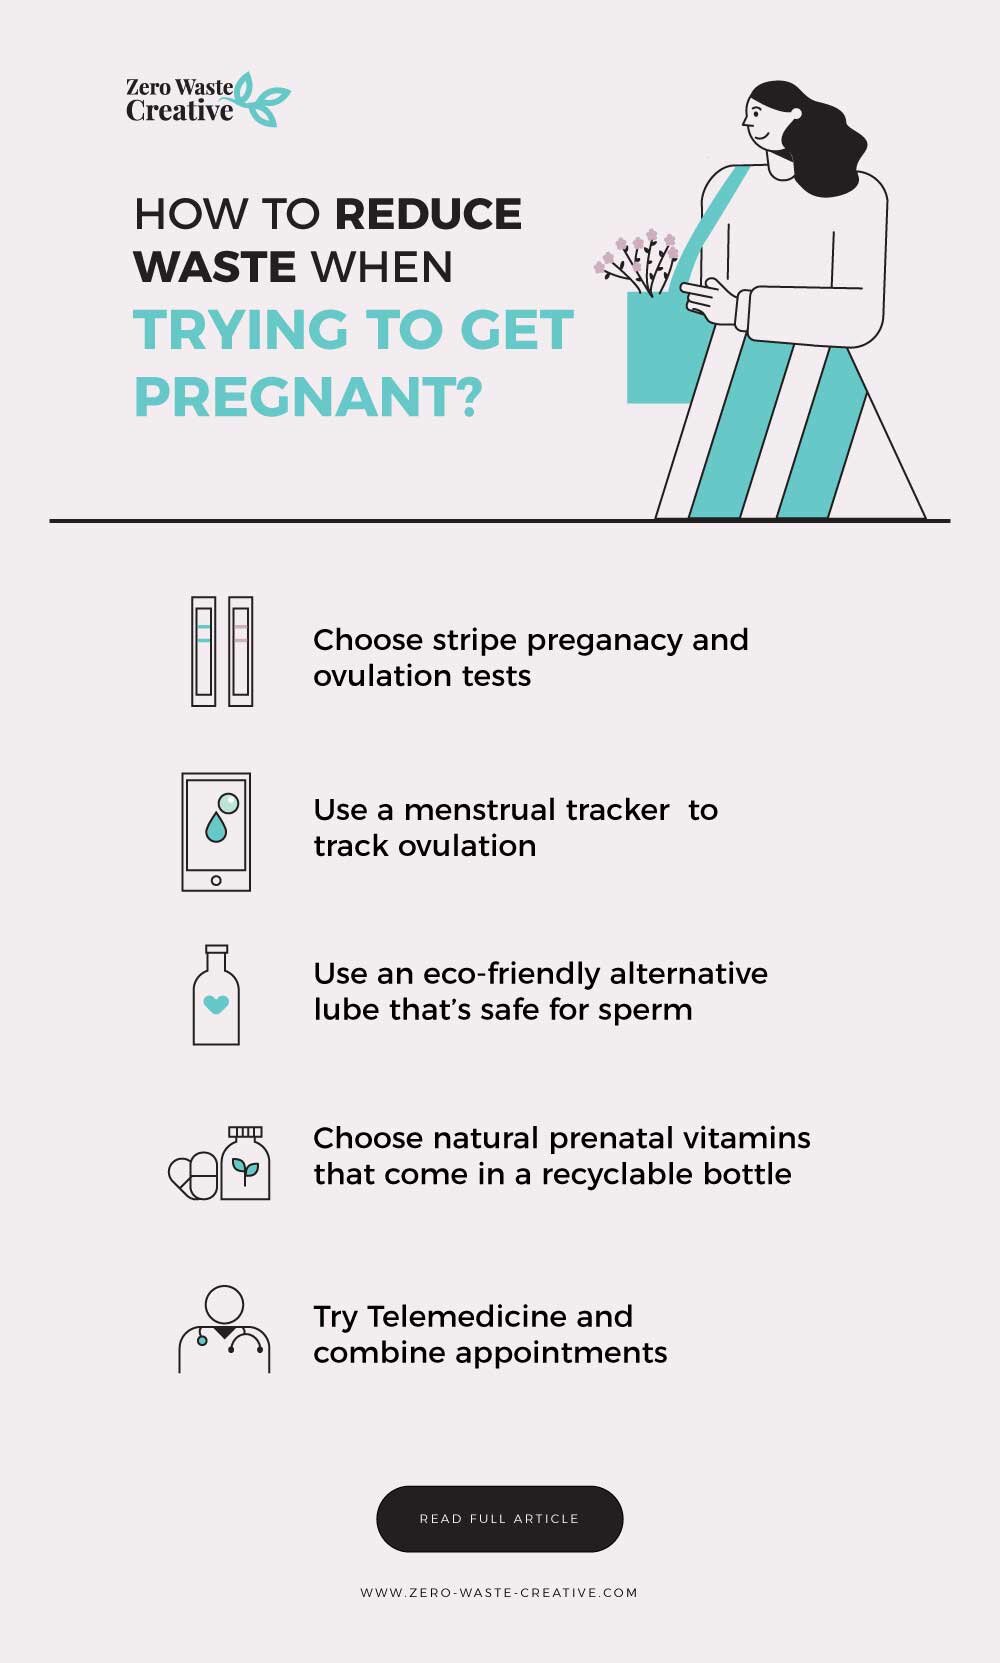 How-can-I-reduce-waste-when-trying-to-get-pregnant--.jpg